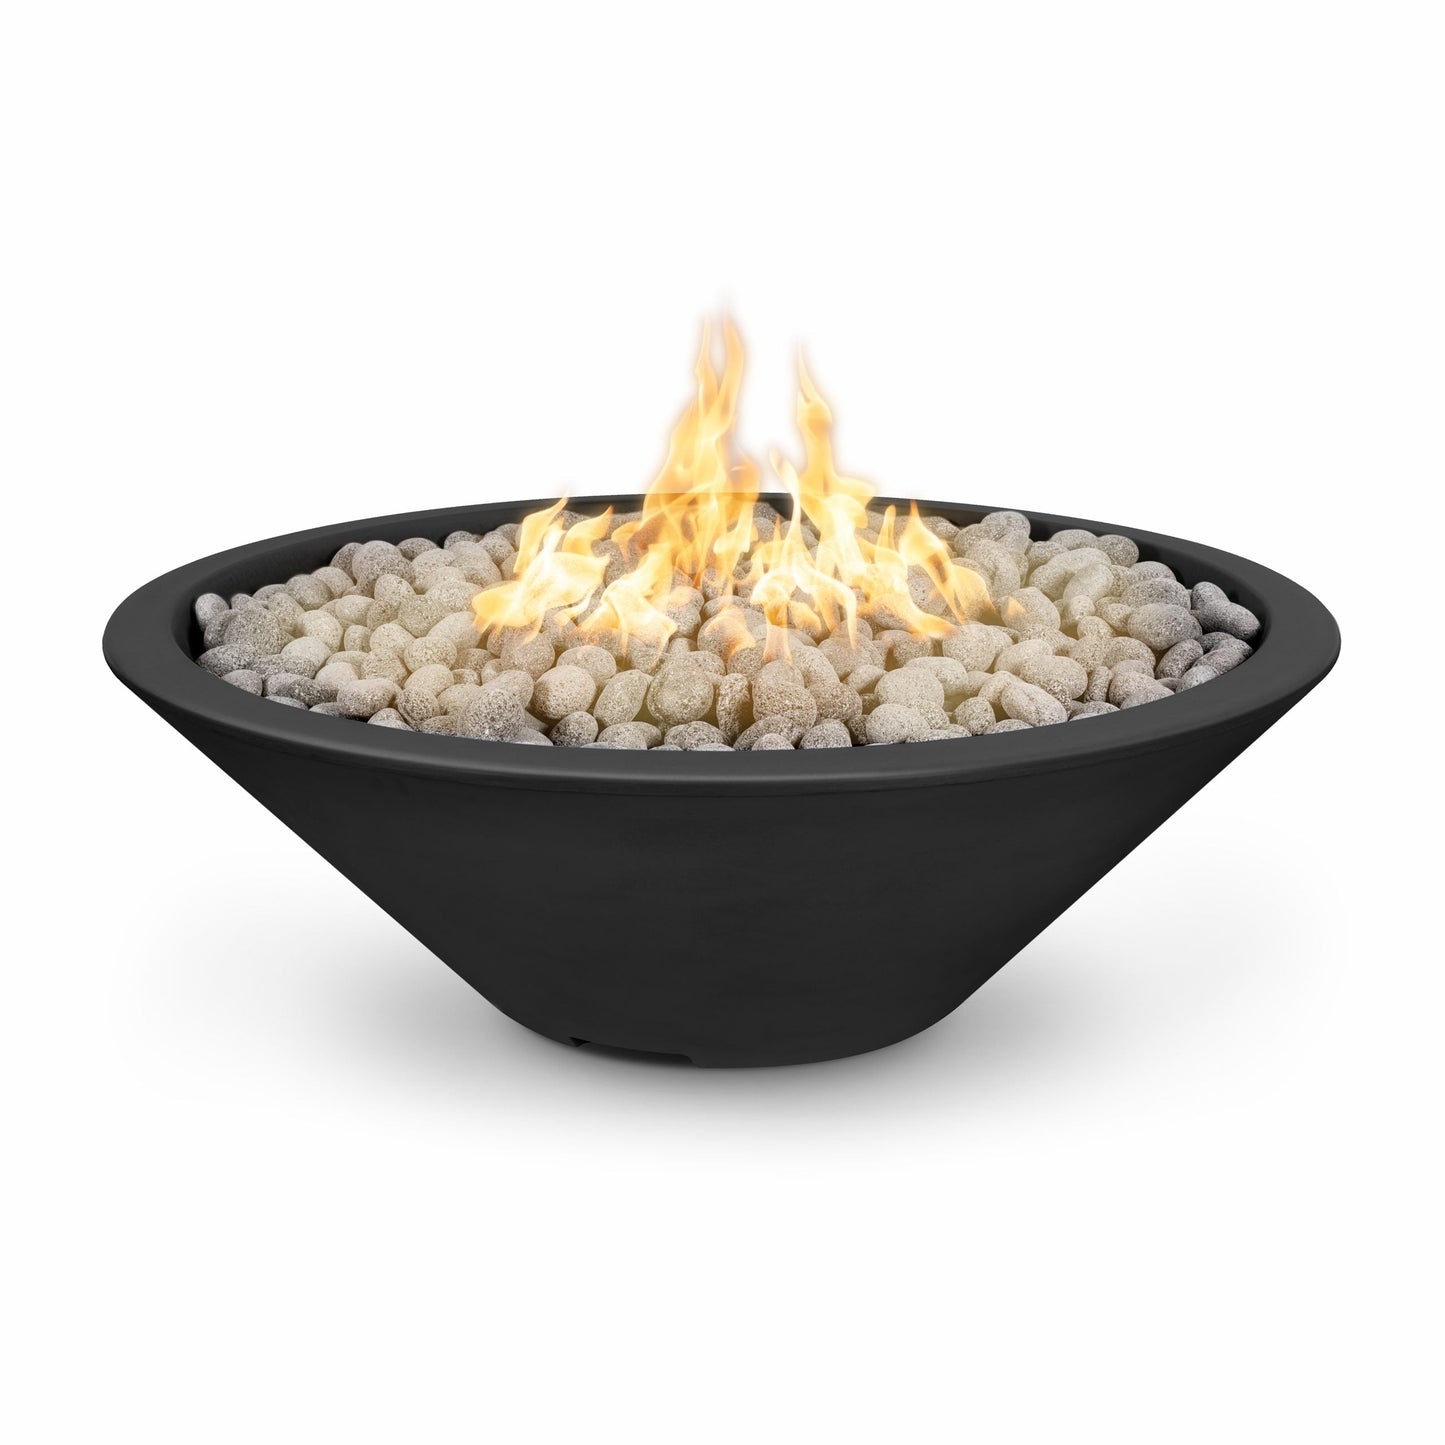 The Outdoor Plus Round Cazo 48" White Powder Coated Metal Liquid Propane Fire Pit with Match Lit with Flame Sense Ignition